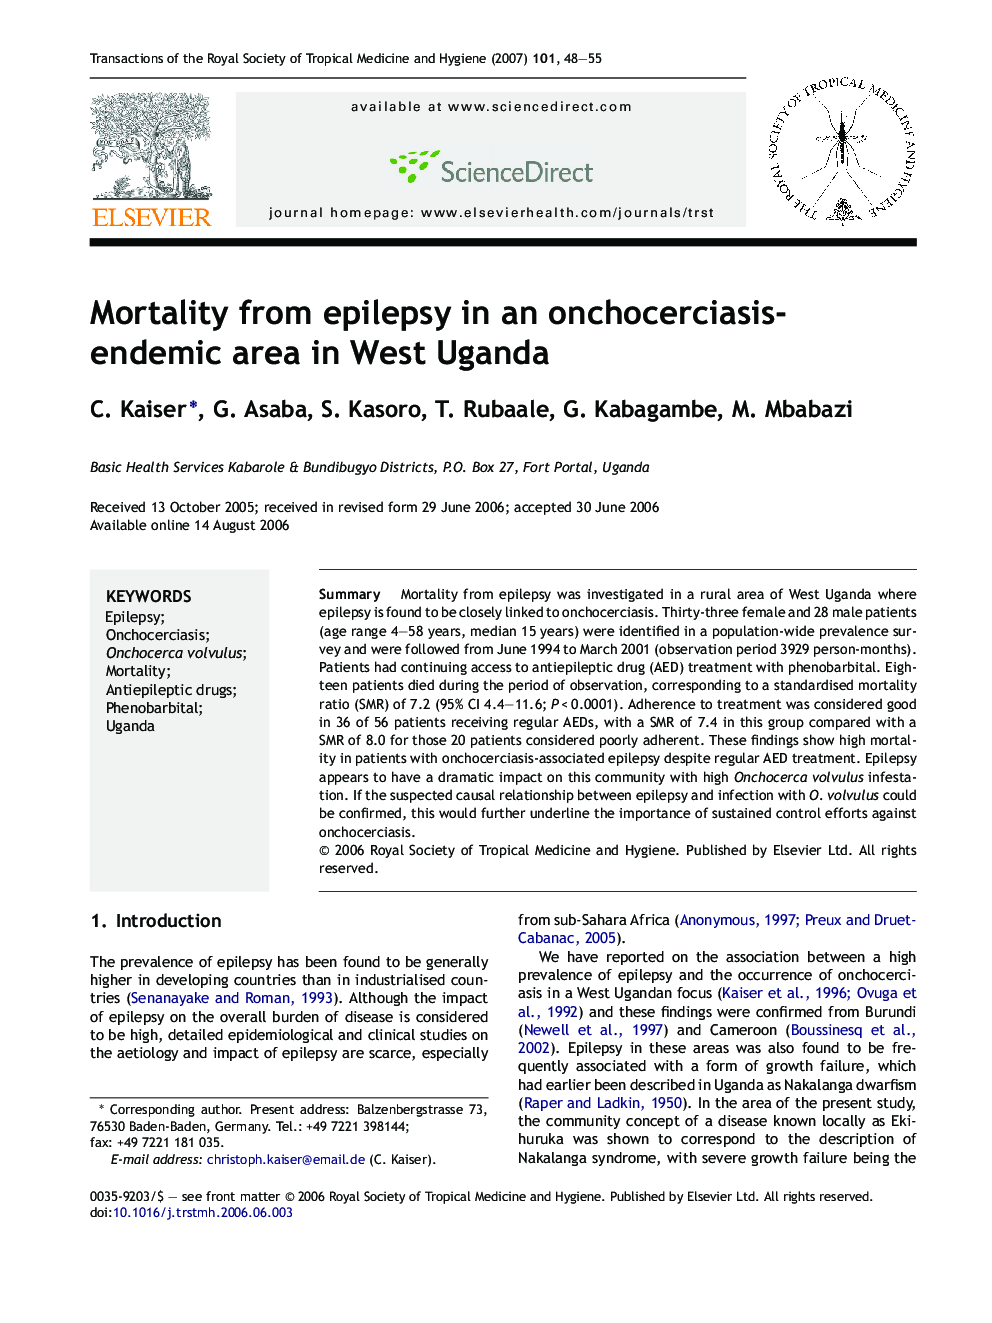 Mortality from epilepsy in an onchocerciasis-endemic area in West Uganda